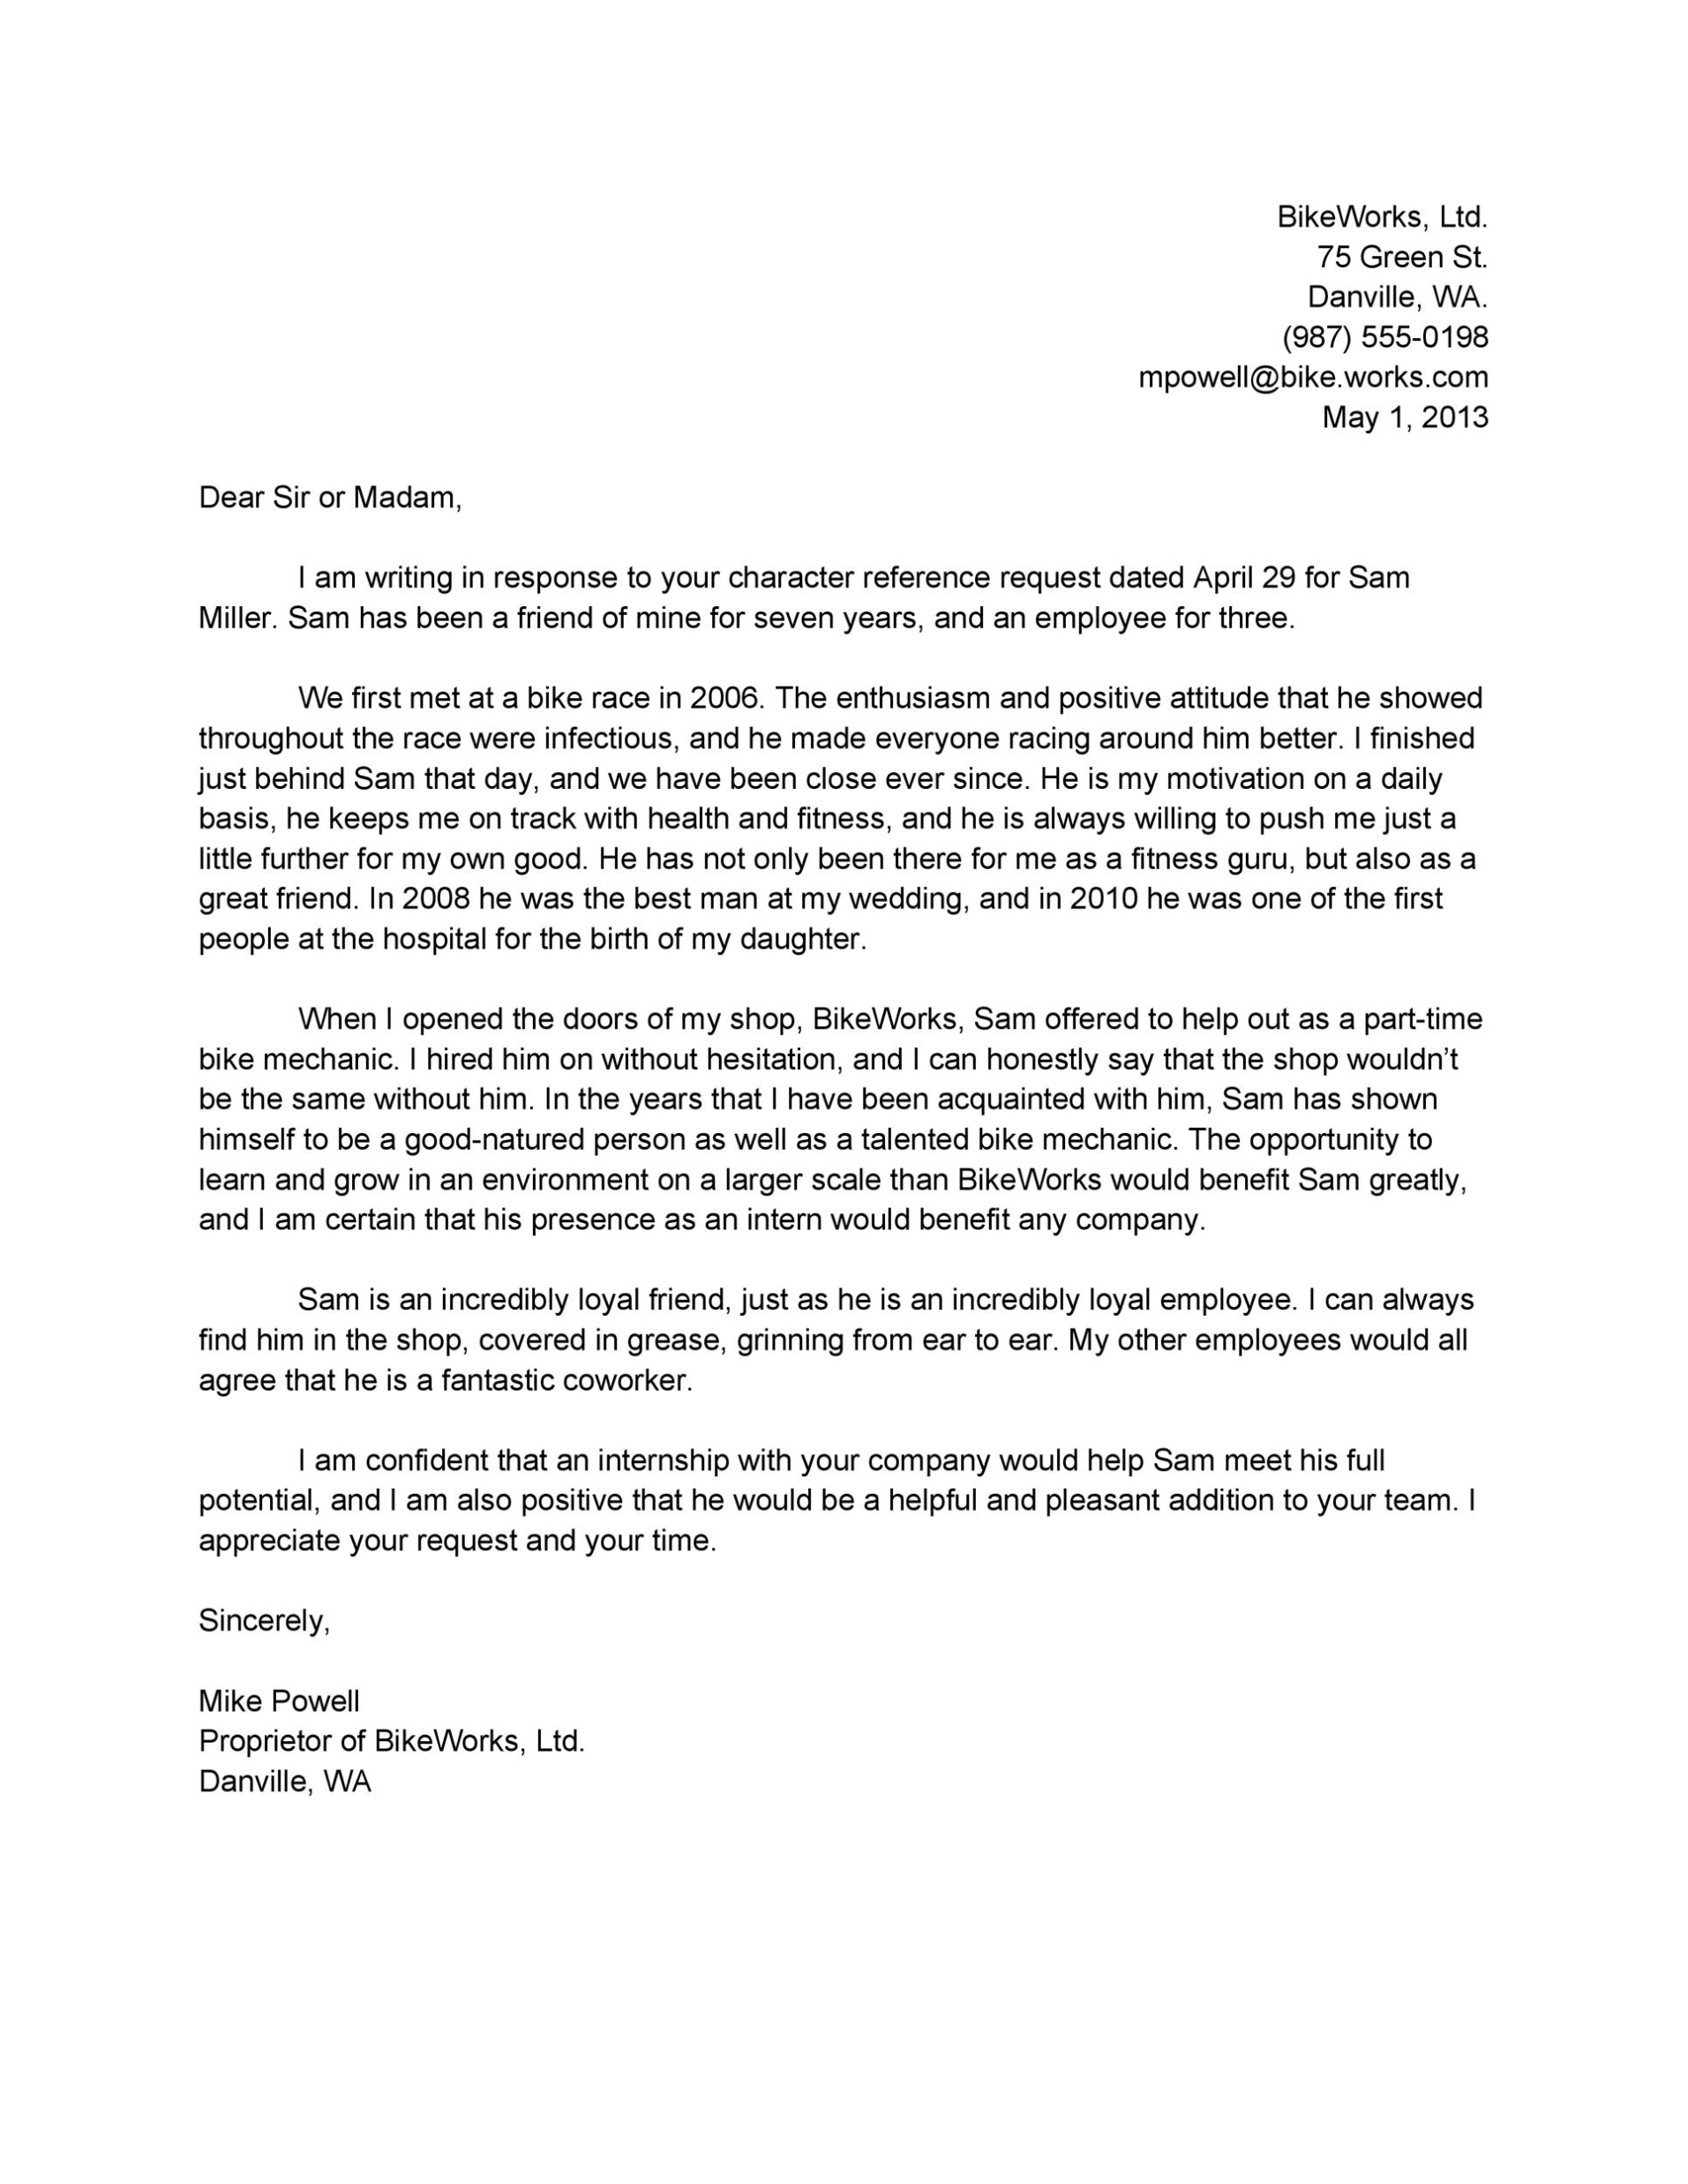 Personal Character Reference Letter For A Friend Collection – Letter For Letter Of Recommendation For A Friend Template